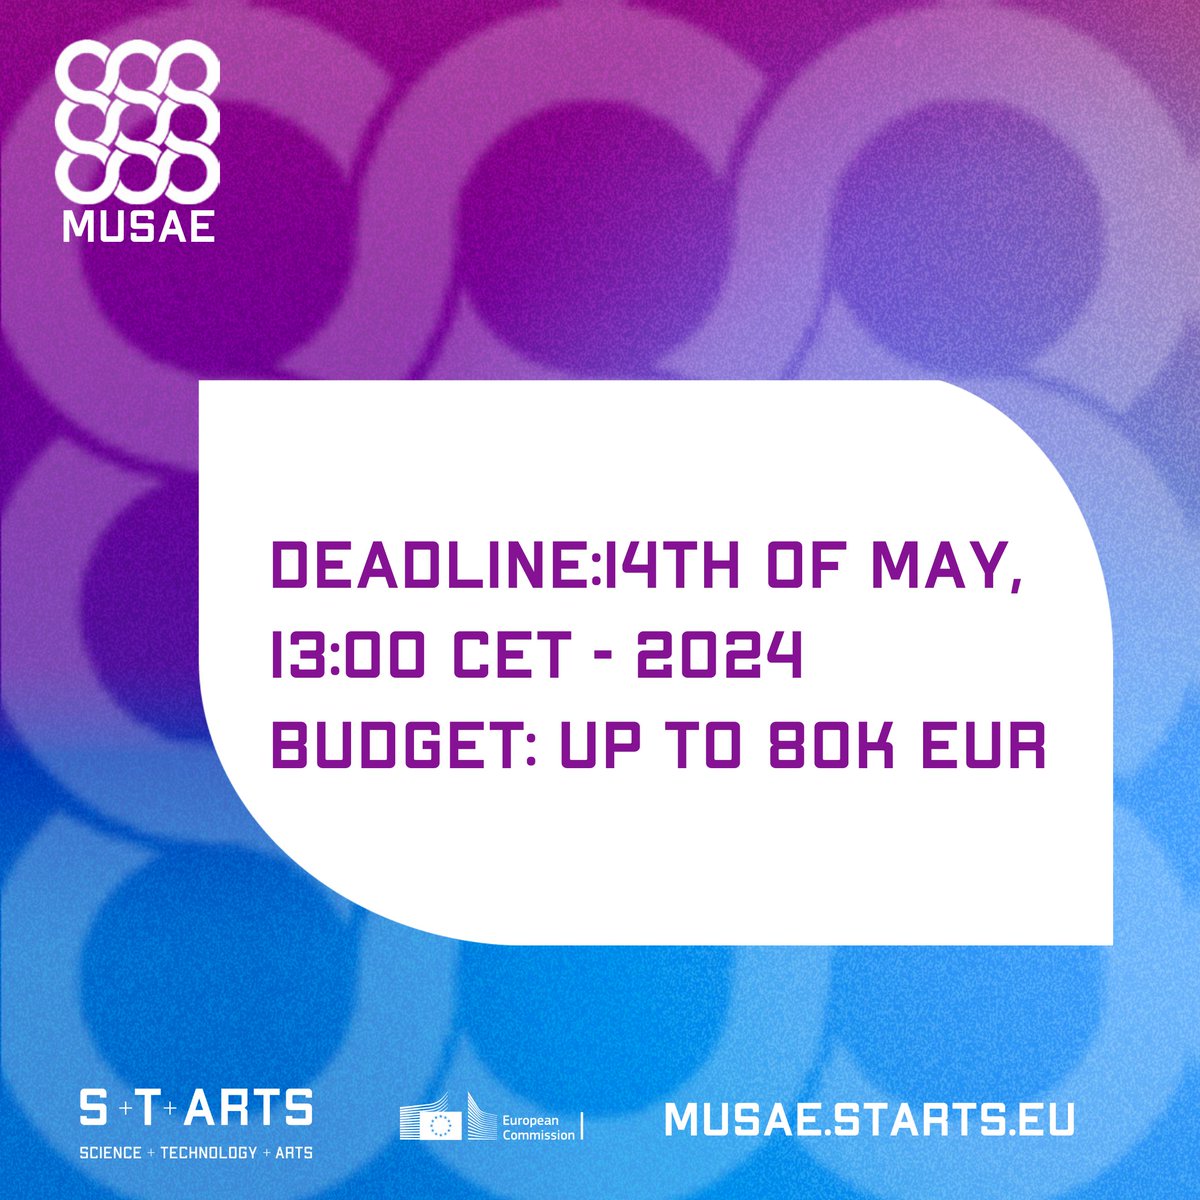 MUSAE S+T+ARTs 2nd Open Call for teams 2 new scenarios are added to the 2nd Open Call! Even more opportunities to explore and create future-driven prototypes! Deadline: 14th May 2024 Budget: Up to 80K EUR More info can be found here: musae.starts.eu/wp-content/upl…